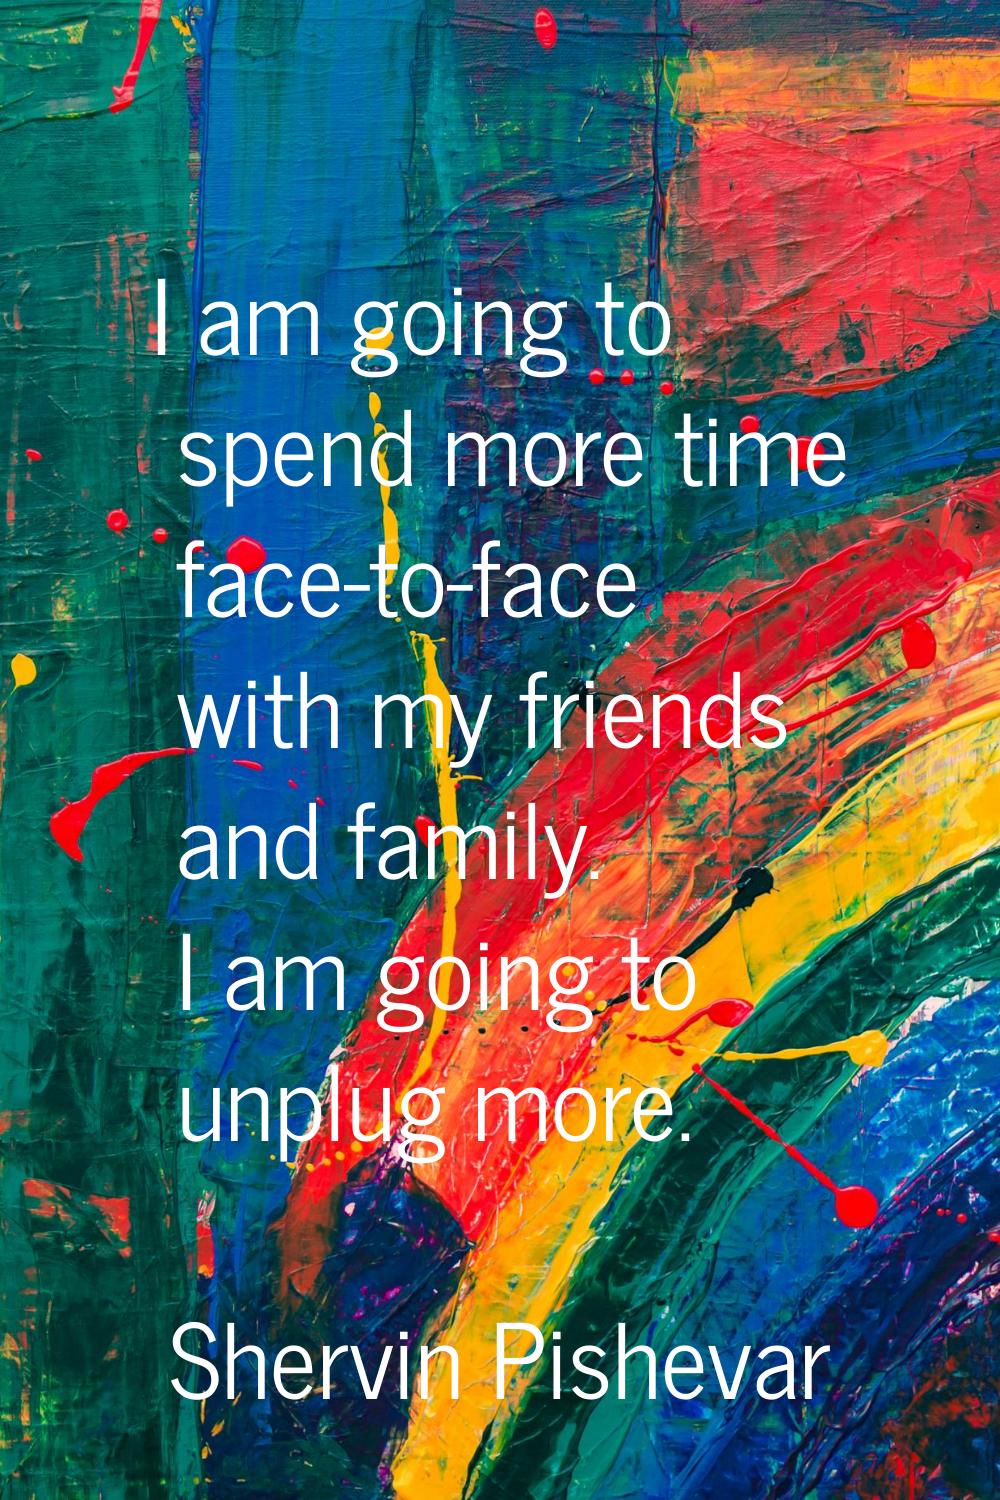 I am going to spend more time face-to-face with my friends and family. I am going to unplug more.